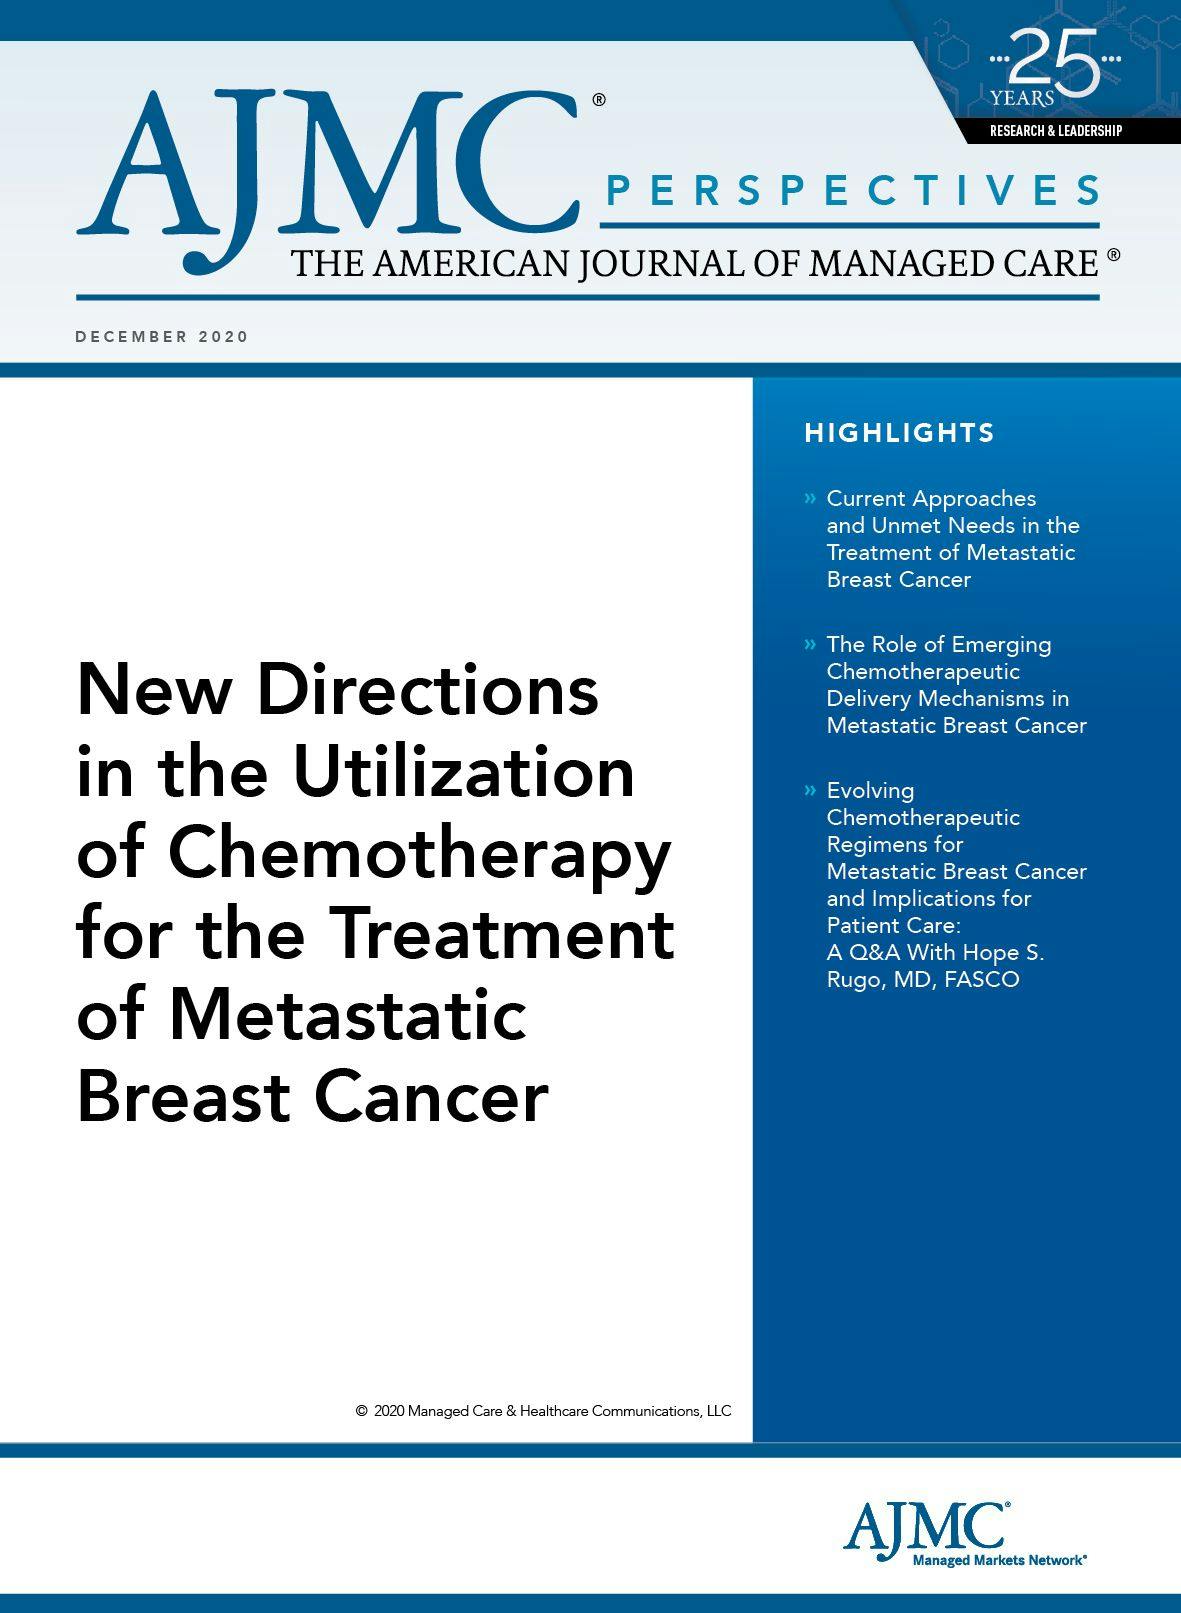 New Directions in the Utilization of Chemotherapy for the Treatment of Metastatic Breast Cancer